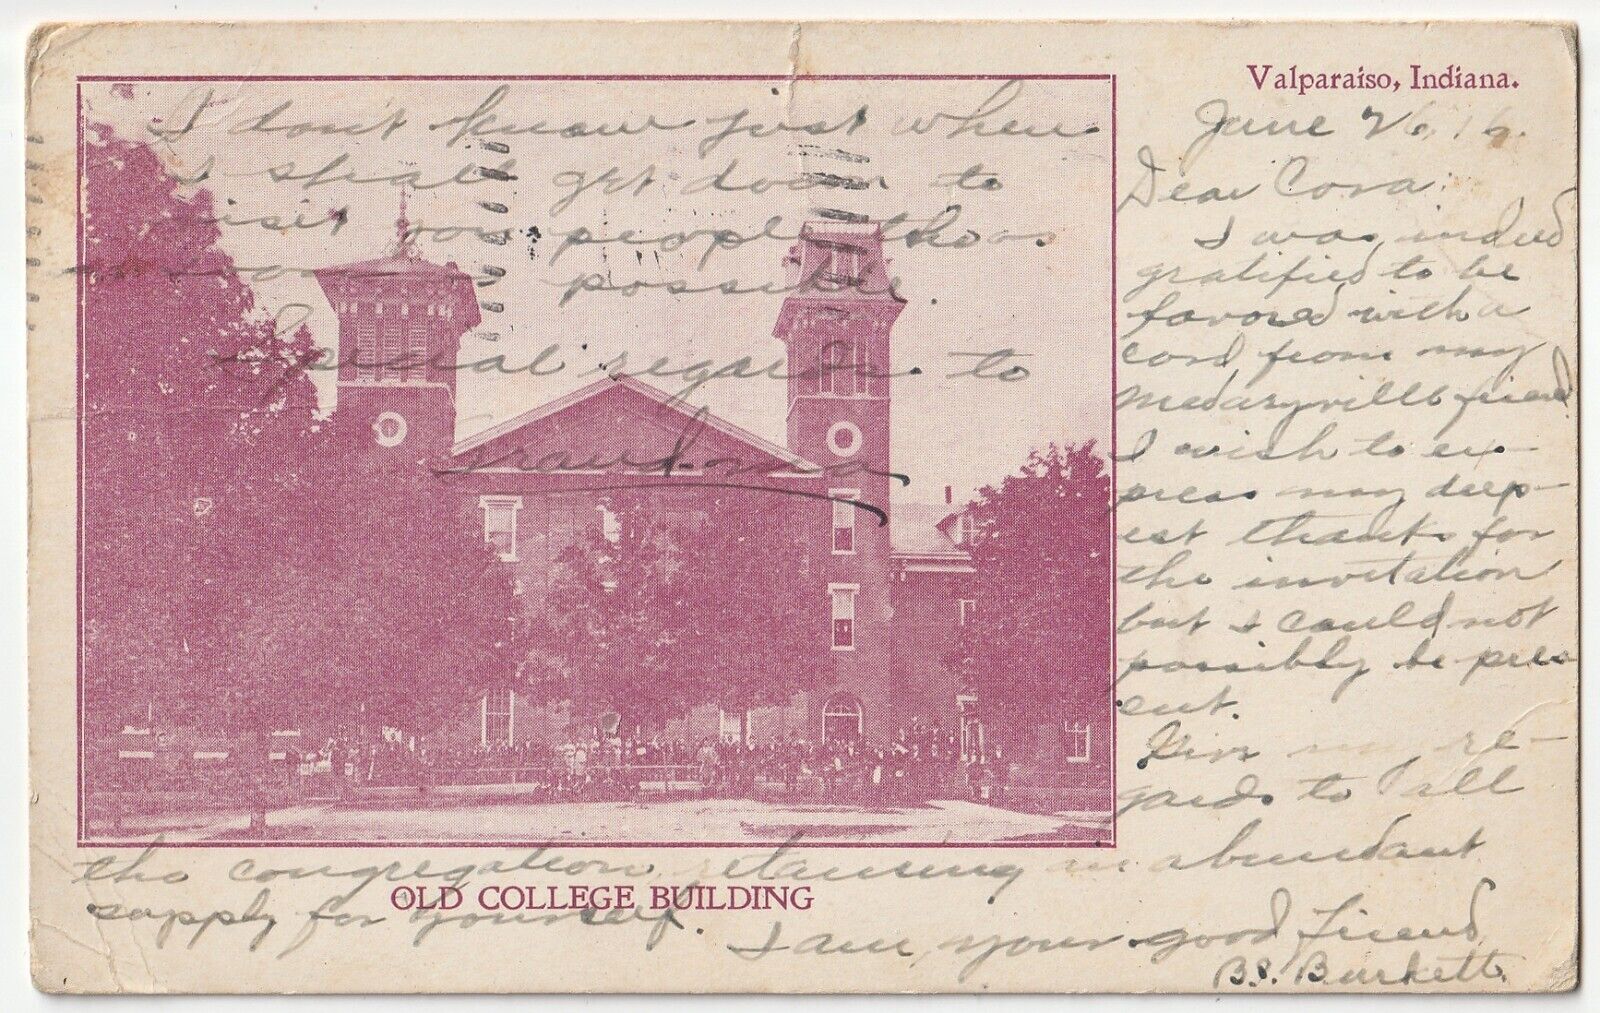 Valparaiso, Indiana - Old College Building - c1916 The Vale of Paradise postcard